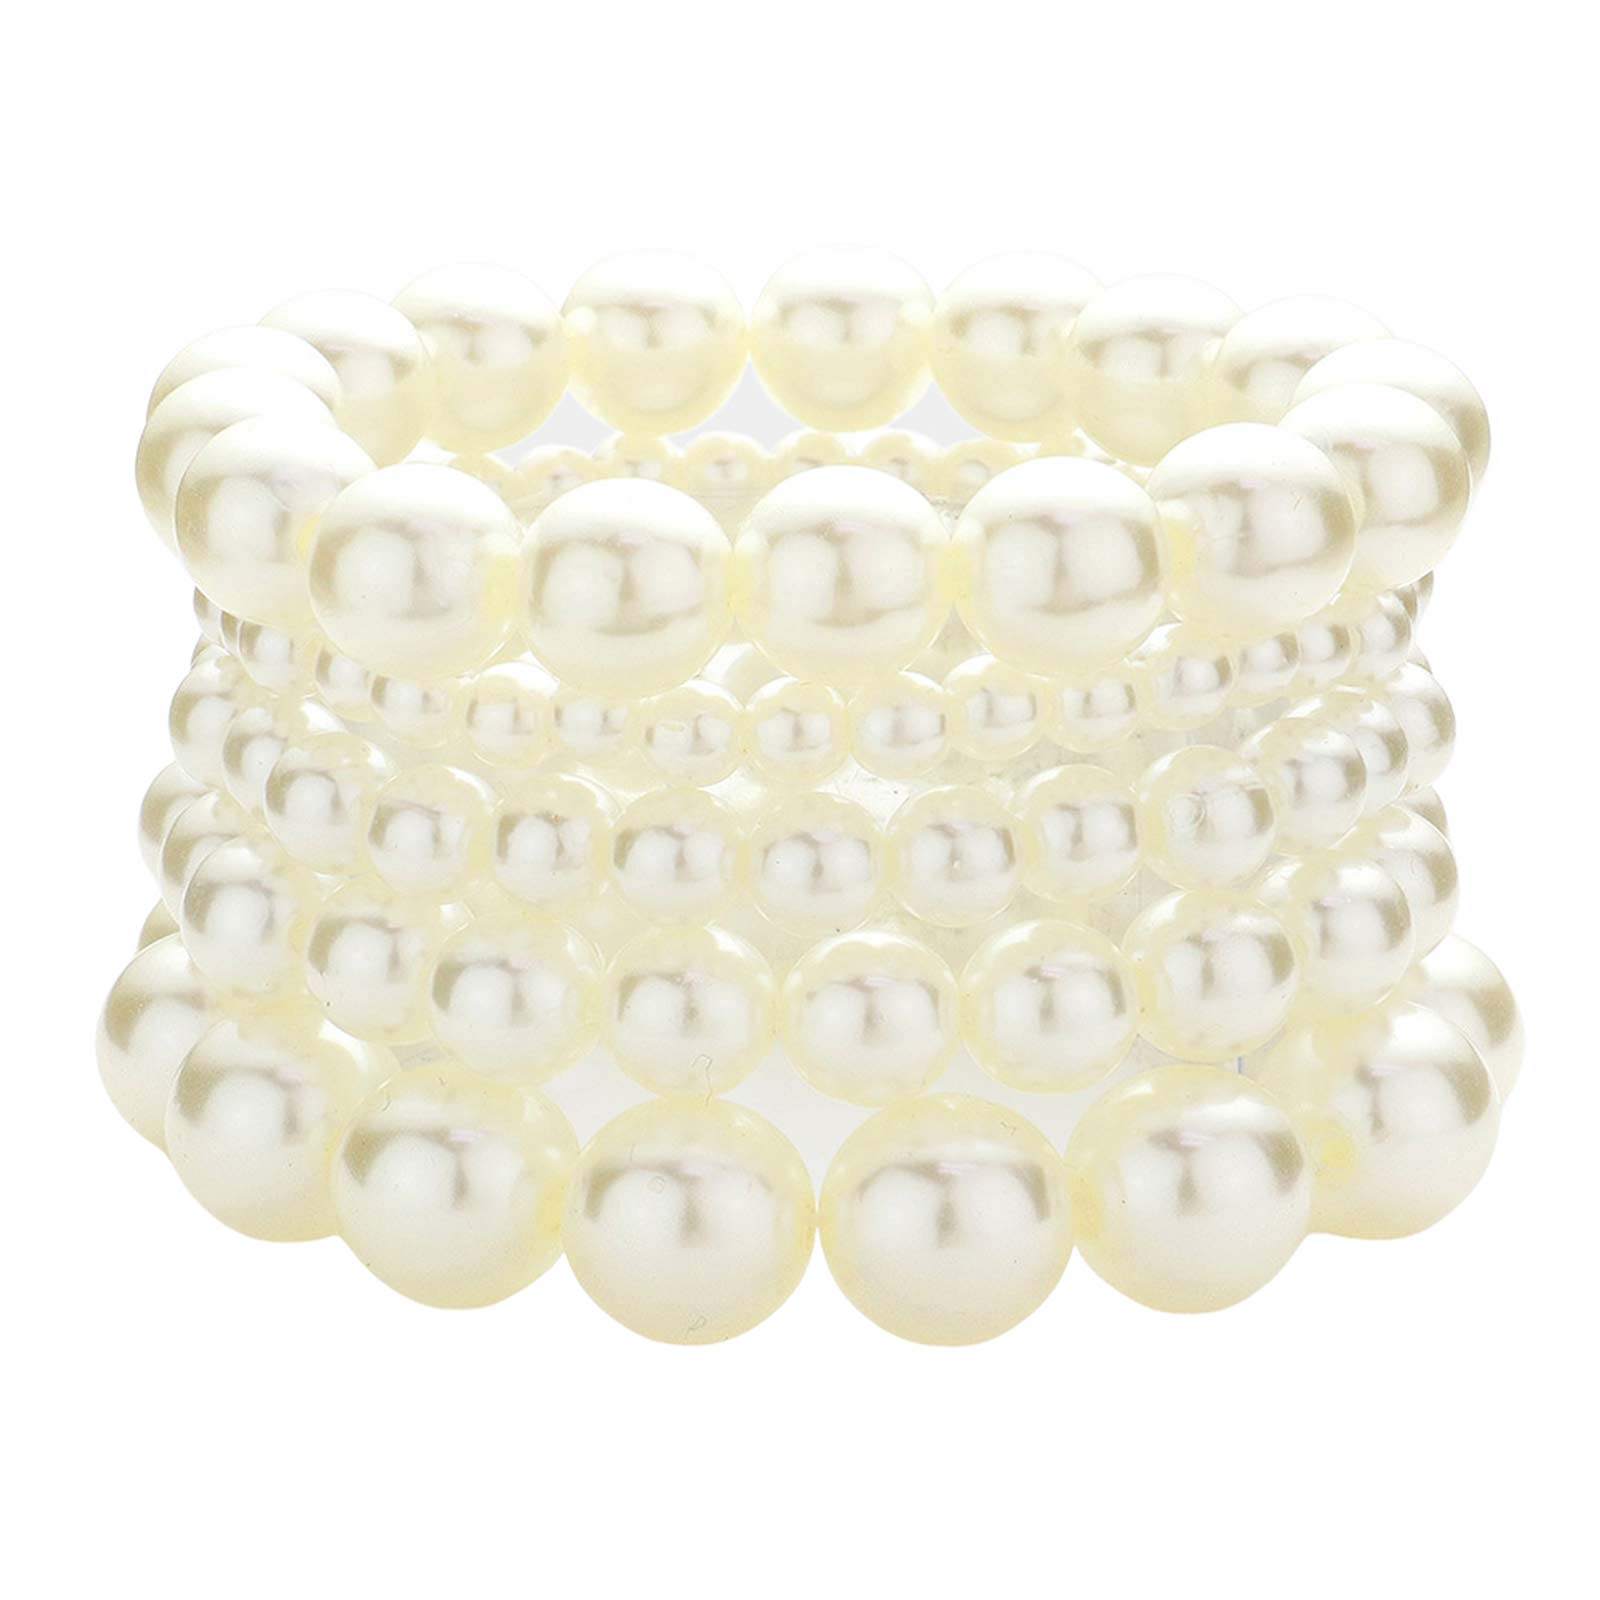 Cream 5PCS - Pearl Strand Stretch Bracelets, these Charm strand stretch bracelets can light up any outfit, and make you feel flawless. Perfect for adding just the right amount of shimmer & shine and a touch of class to special events. Fabulous fashion and sleek style add a pop of pretty color to your attire. 